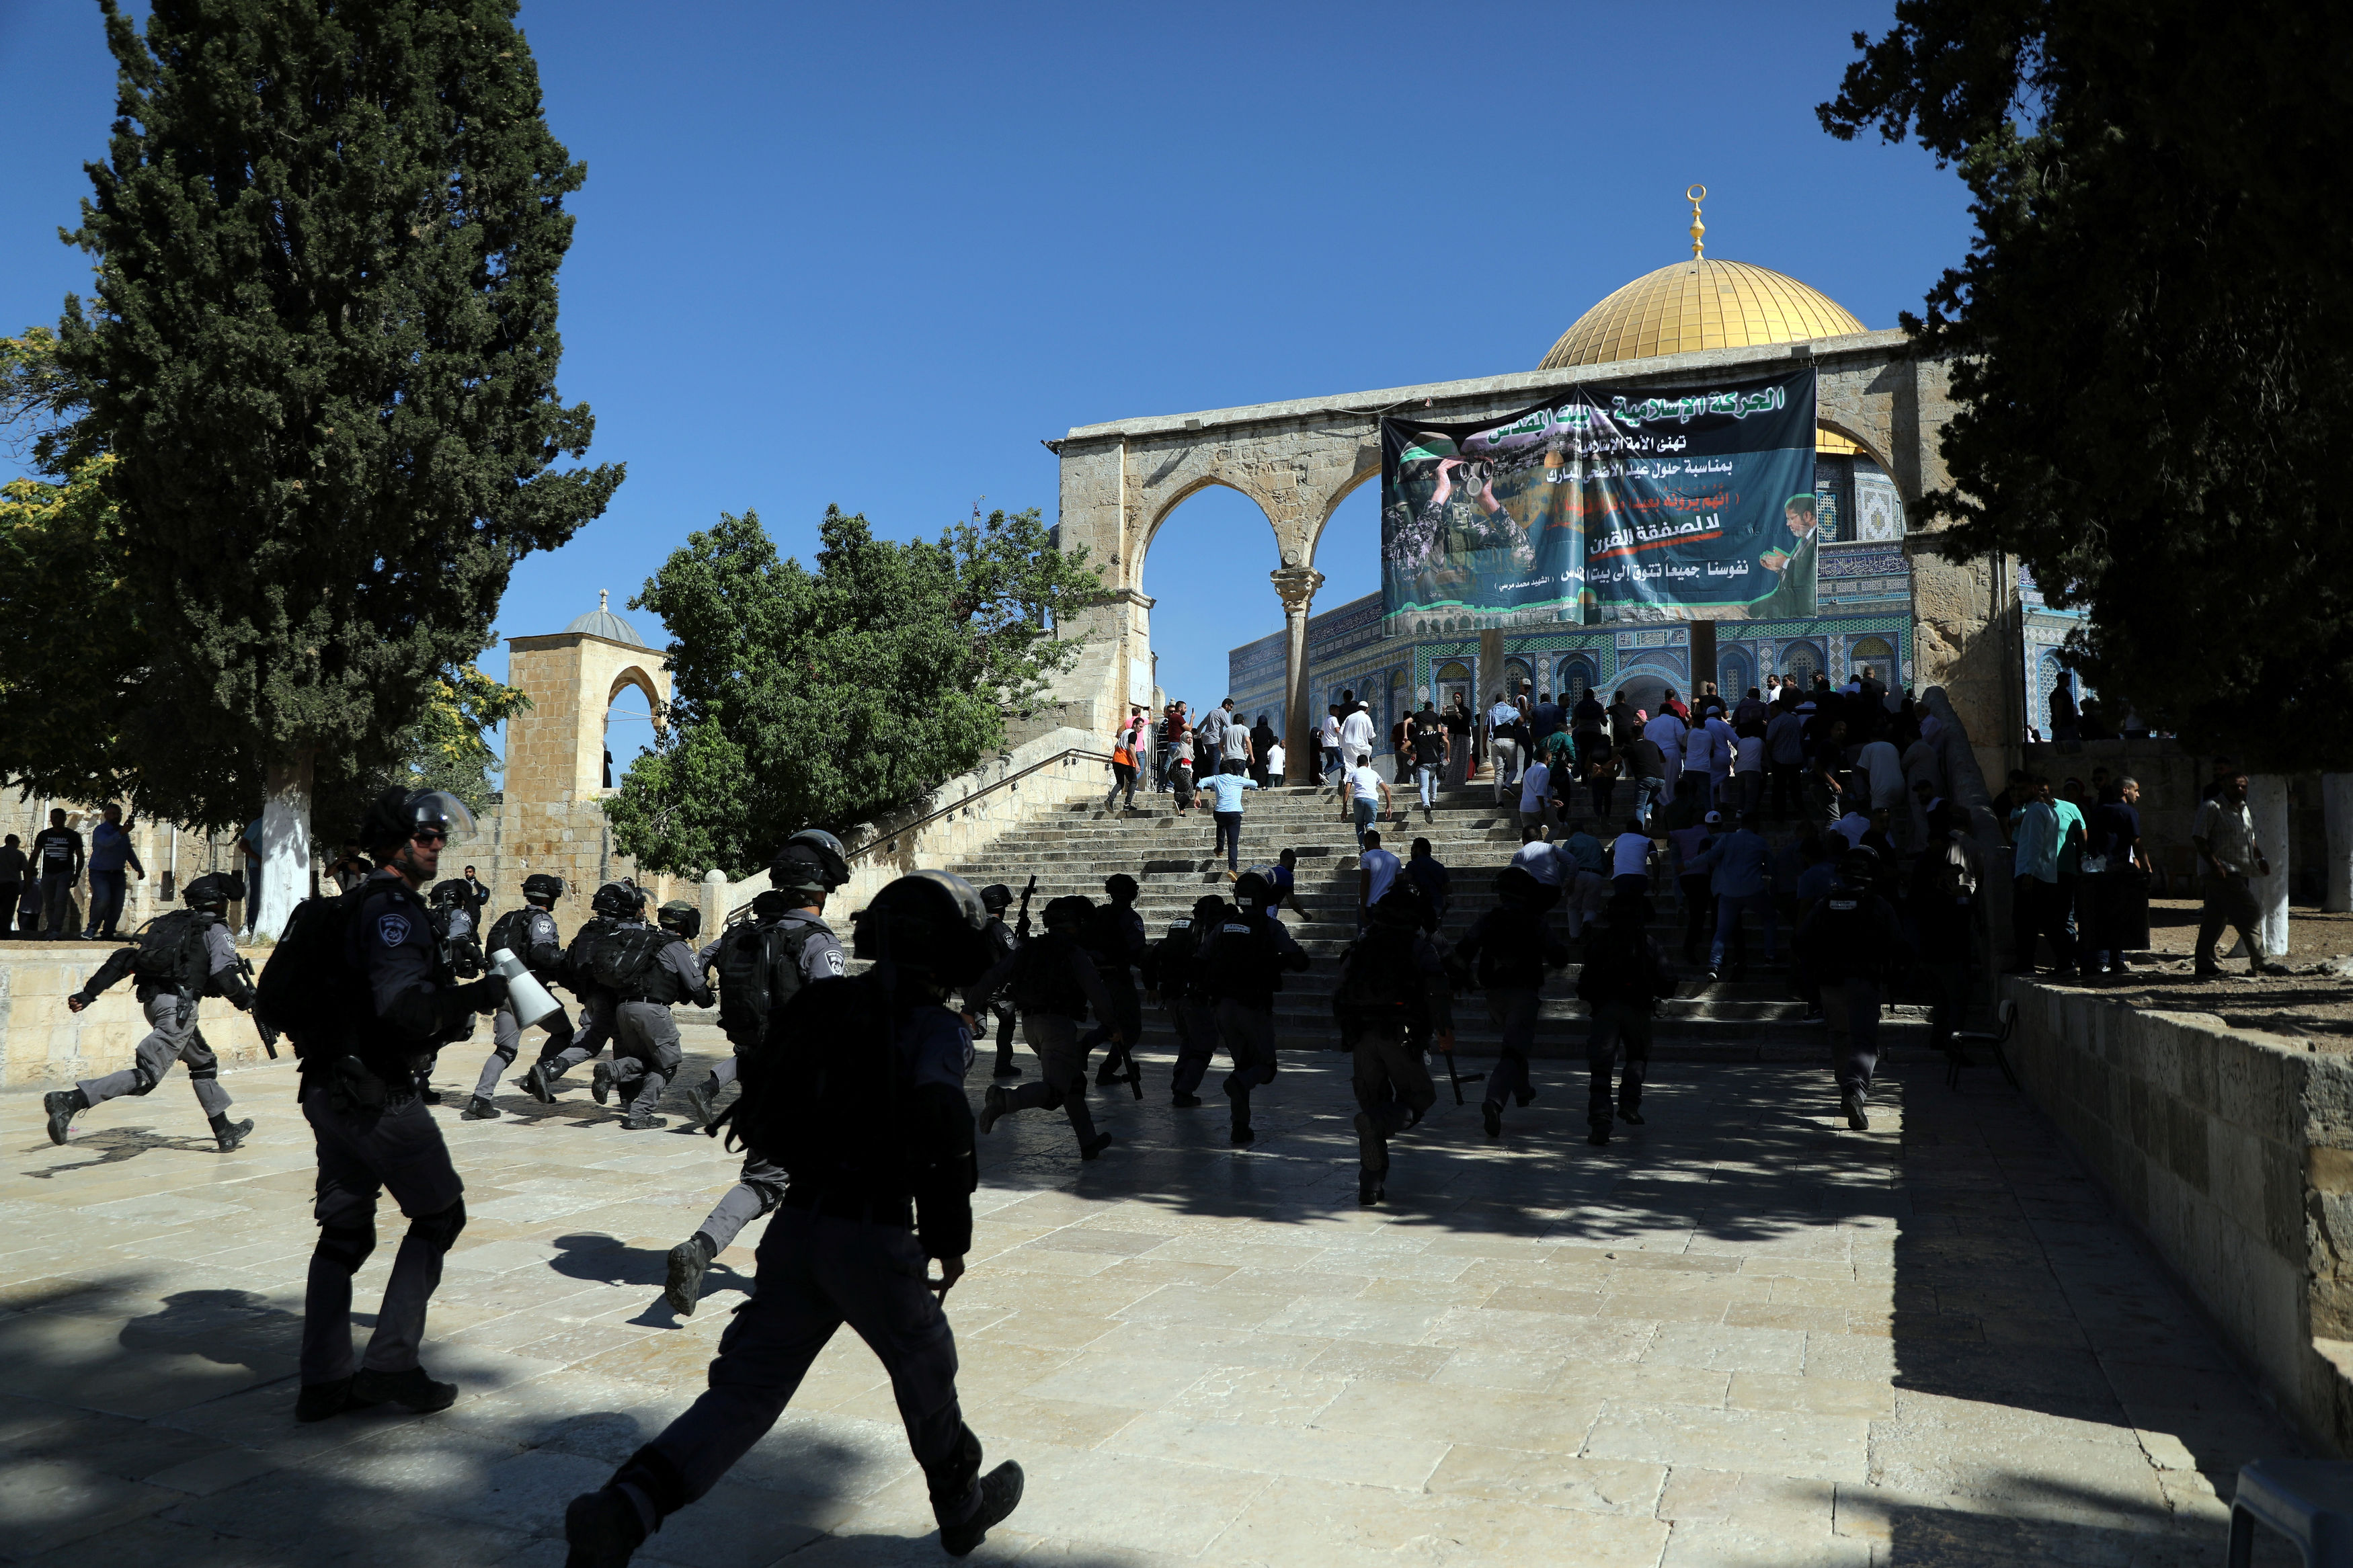 The Dome of the Rock is seen in the background during clashes between Israeli police and Palestinian worshippers on the compound known to Muslims as Noble Sanctuary and to Jews as Temple Mount as Muslims mark Eid al-Adha in Jerusalem's Old City